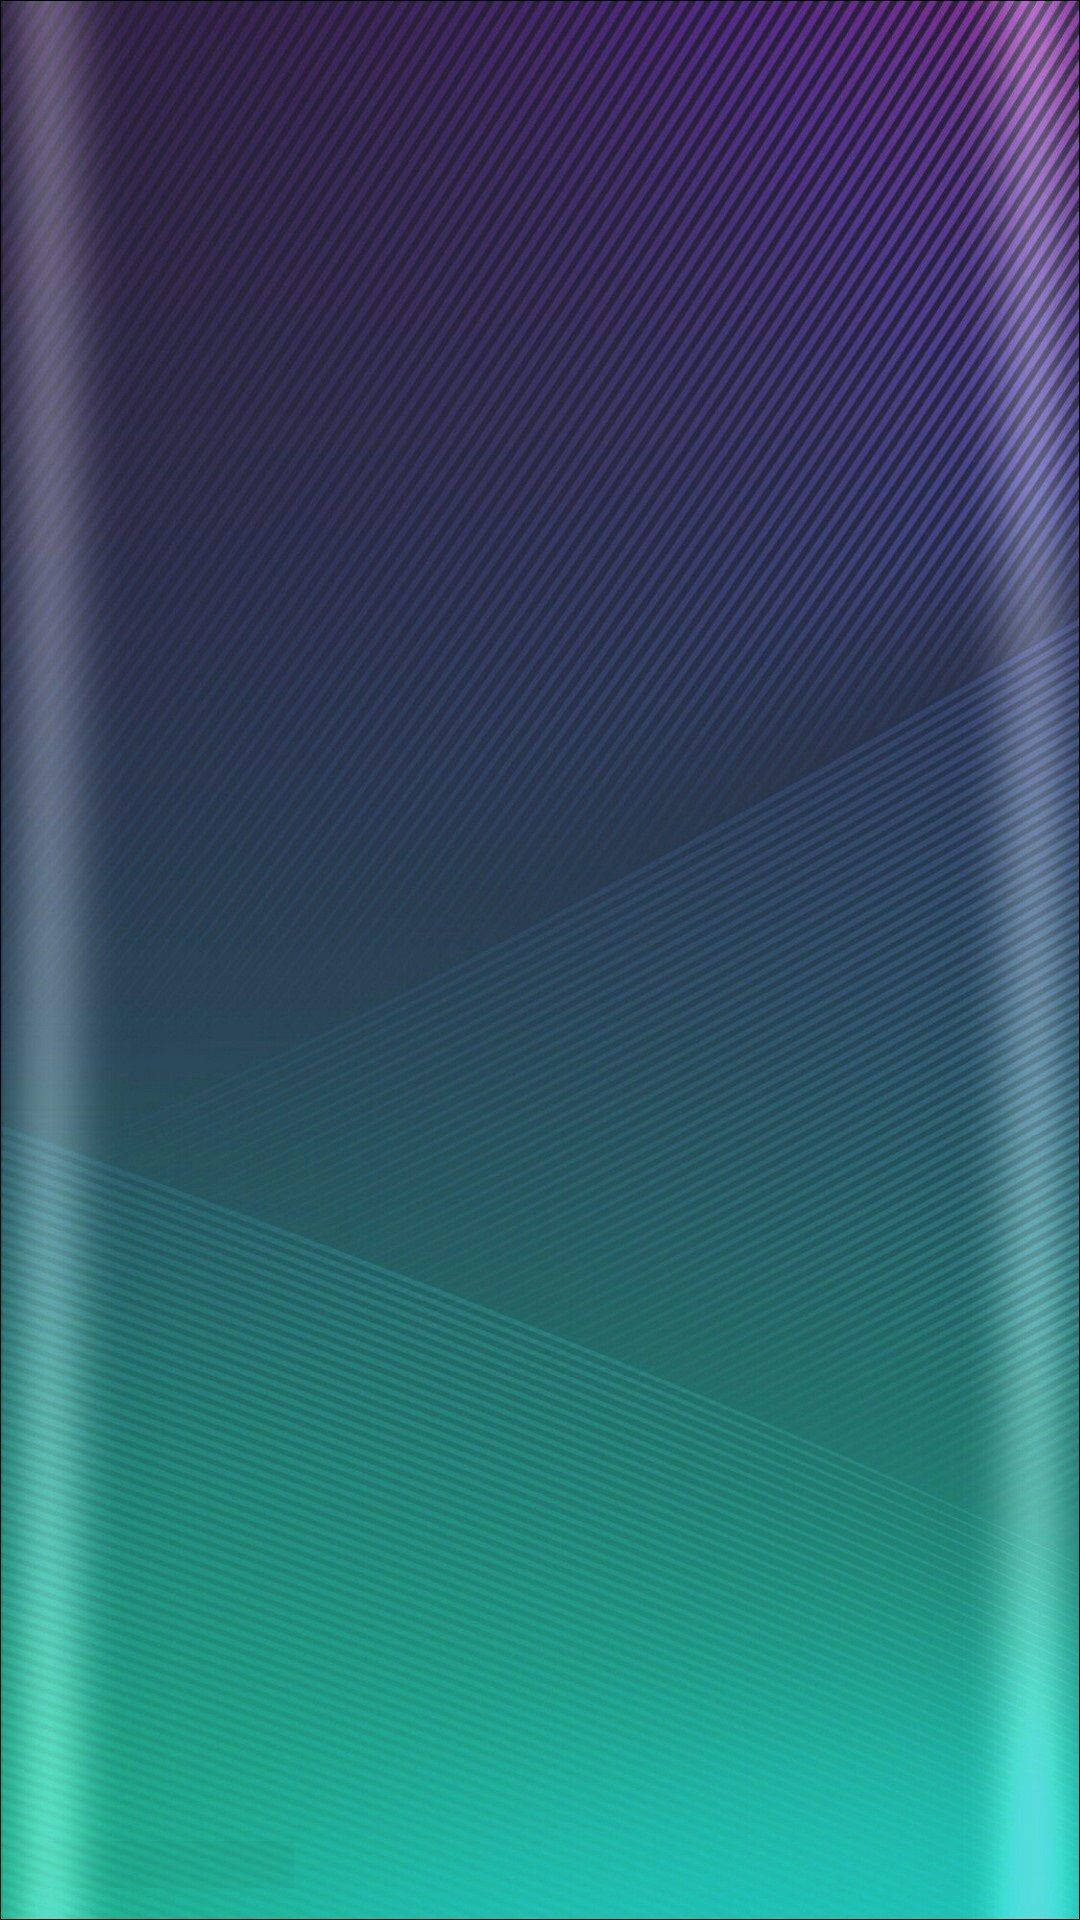 Glossy Purple And Green Color Iphone Wallpaper